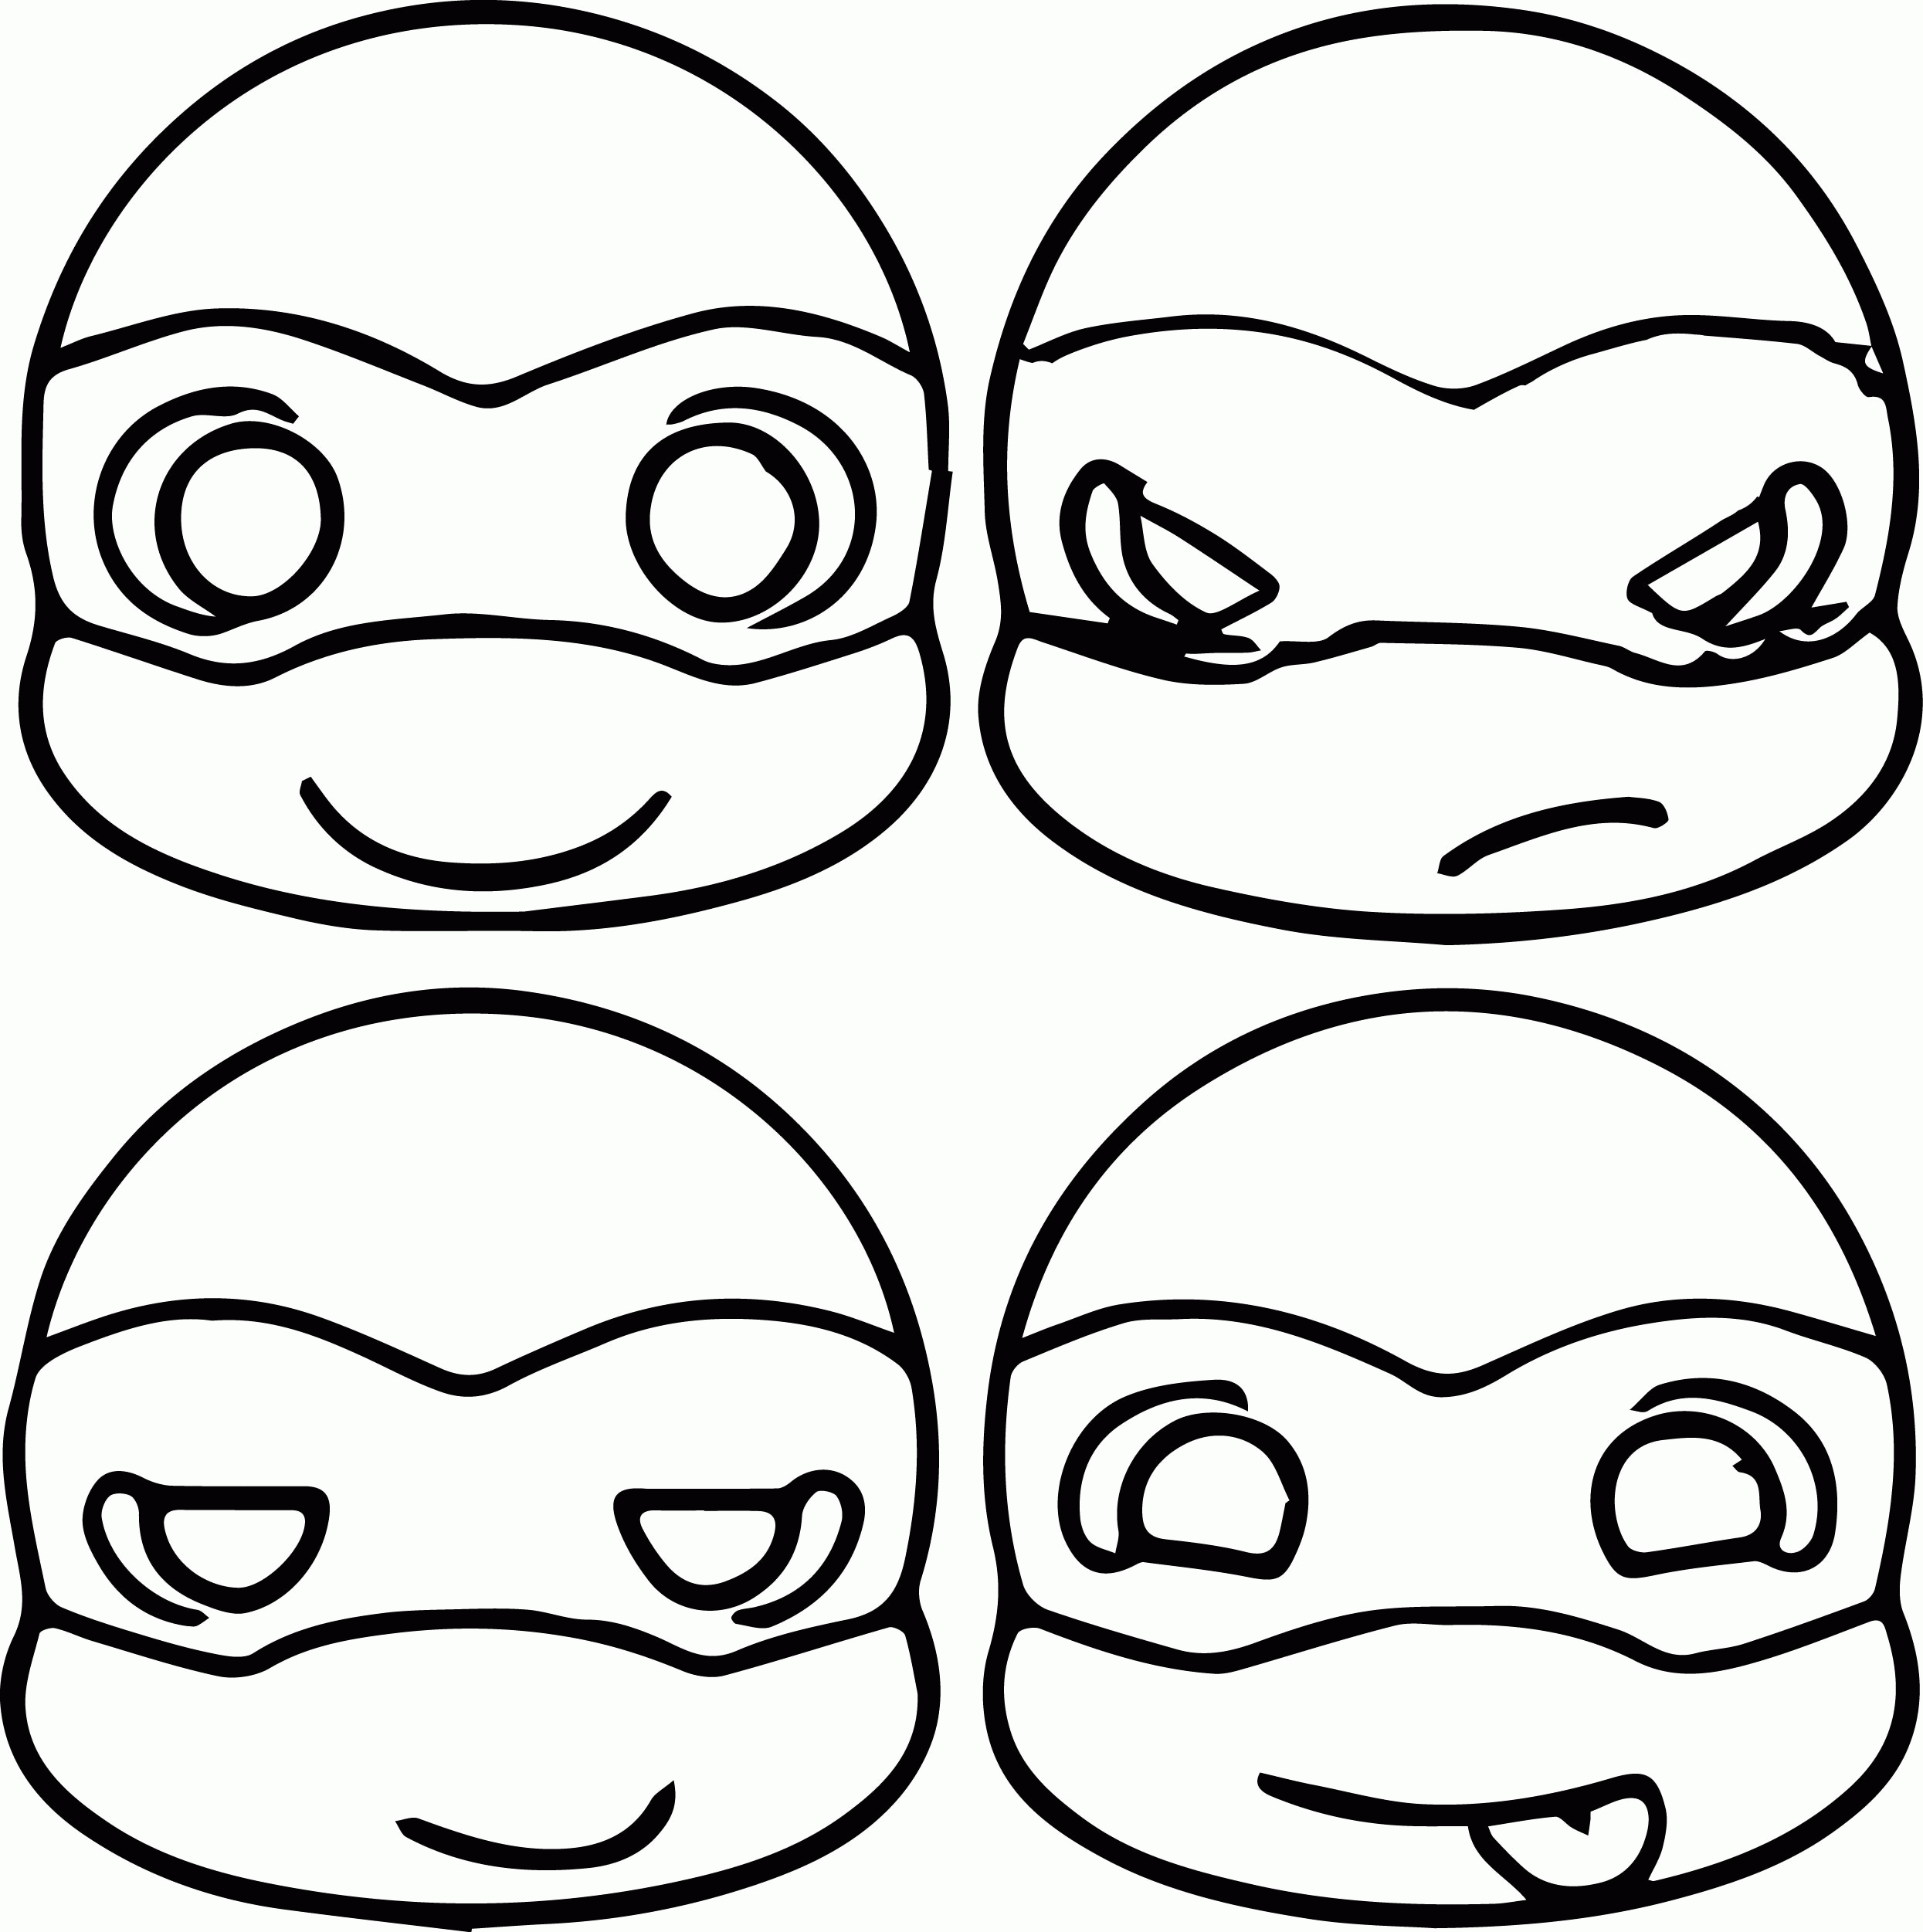 Ninja Turtle Color Sheets - Coloring Pages for Kids and for Adults